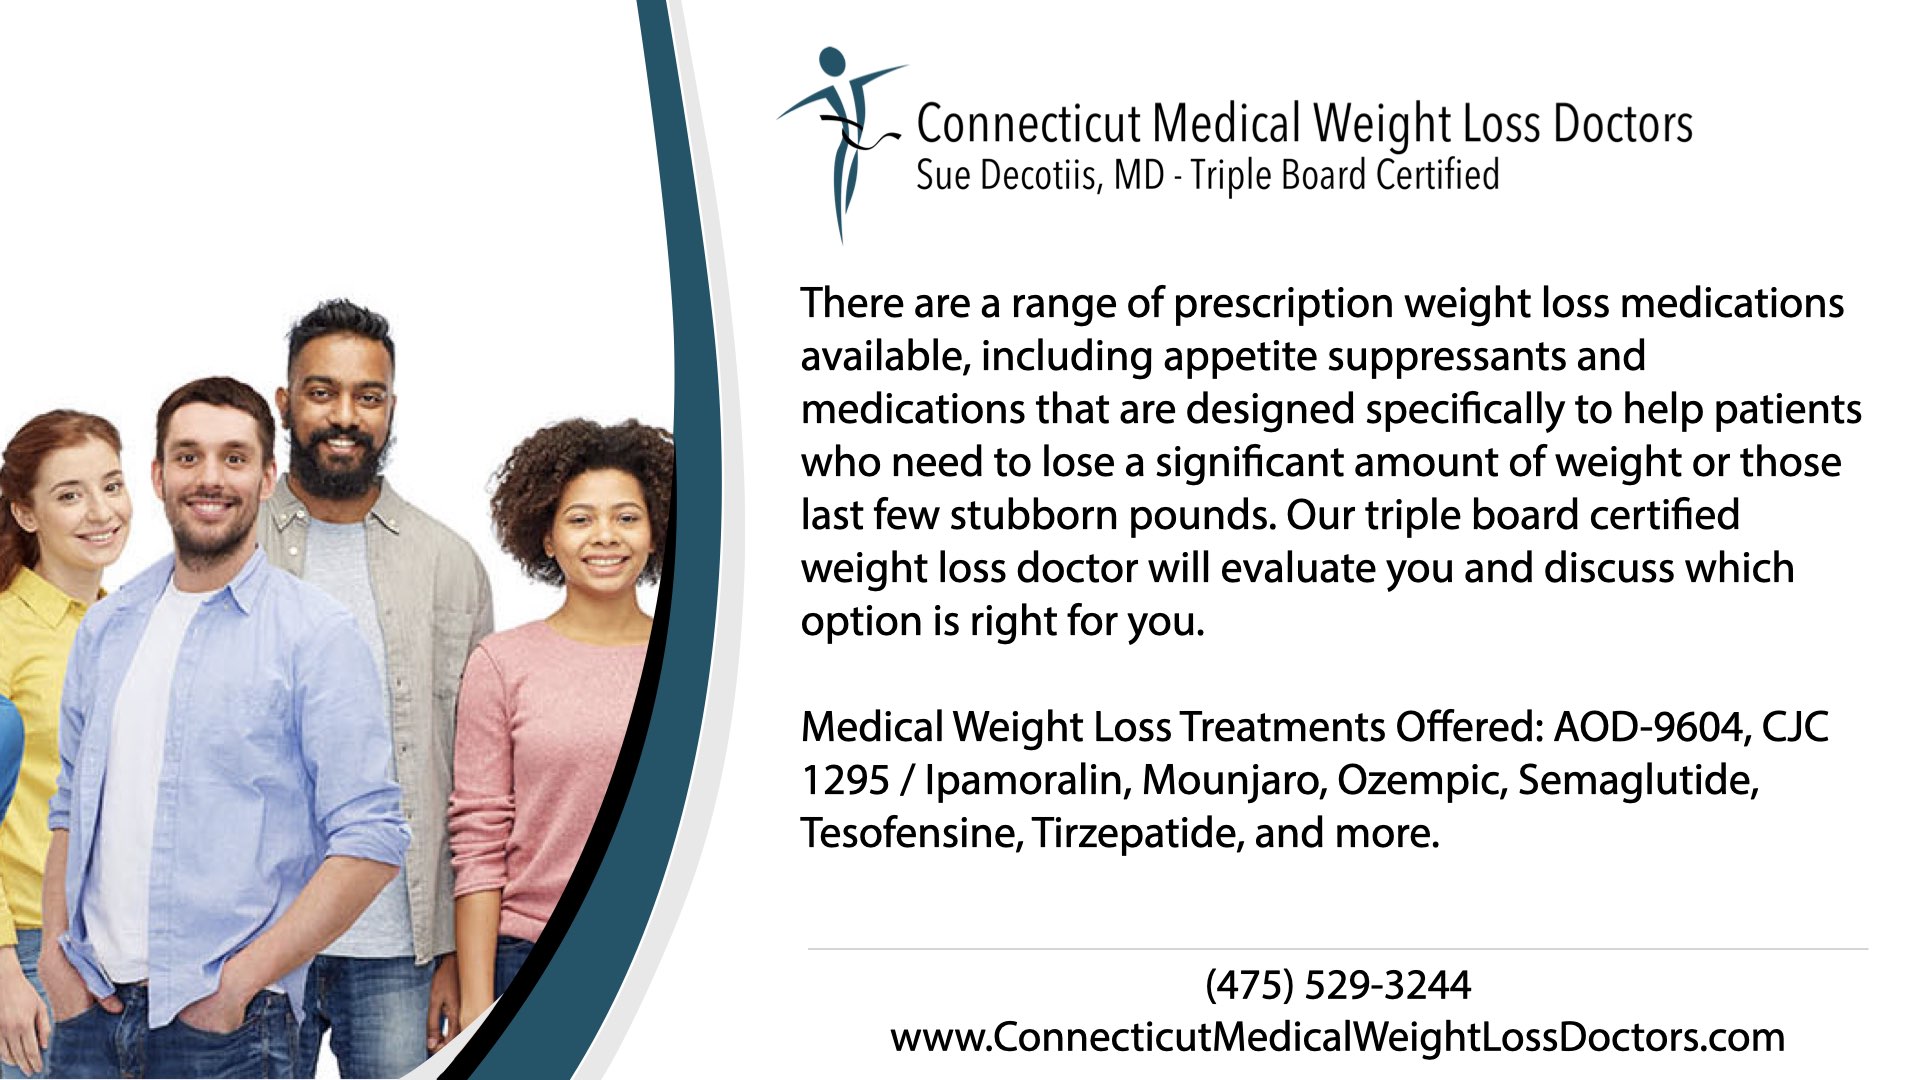 Connecticut Medical Weight Loss Doctors - Our Services